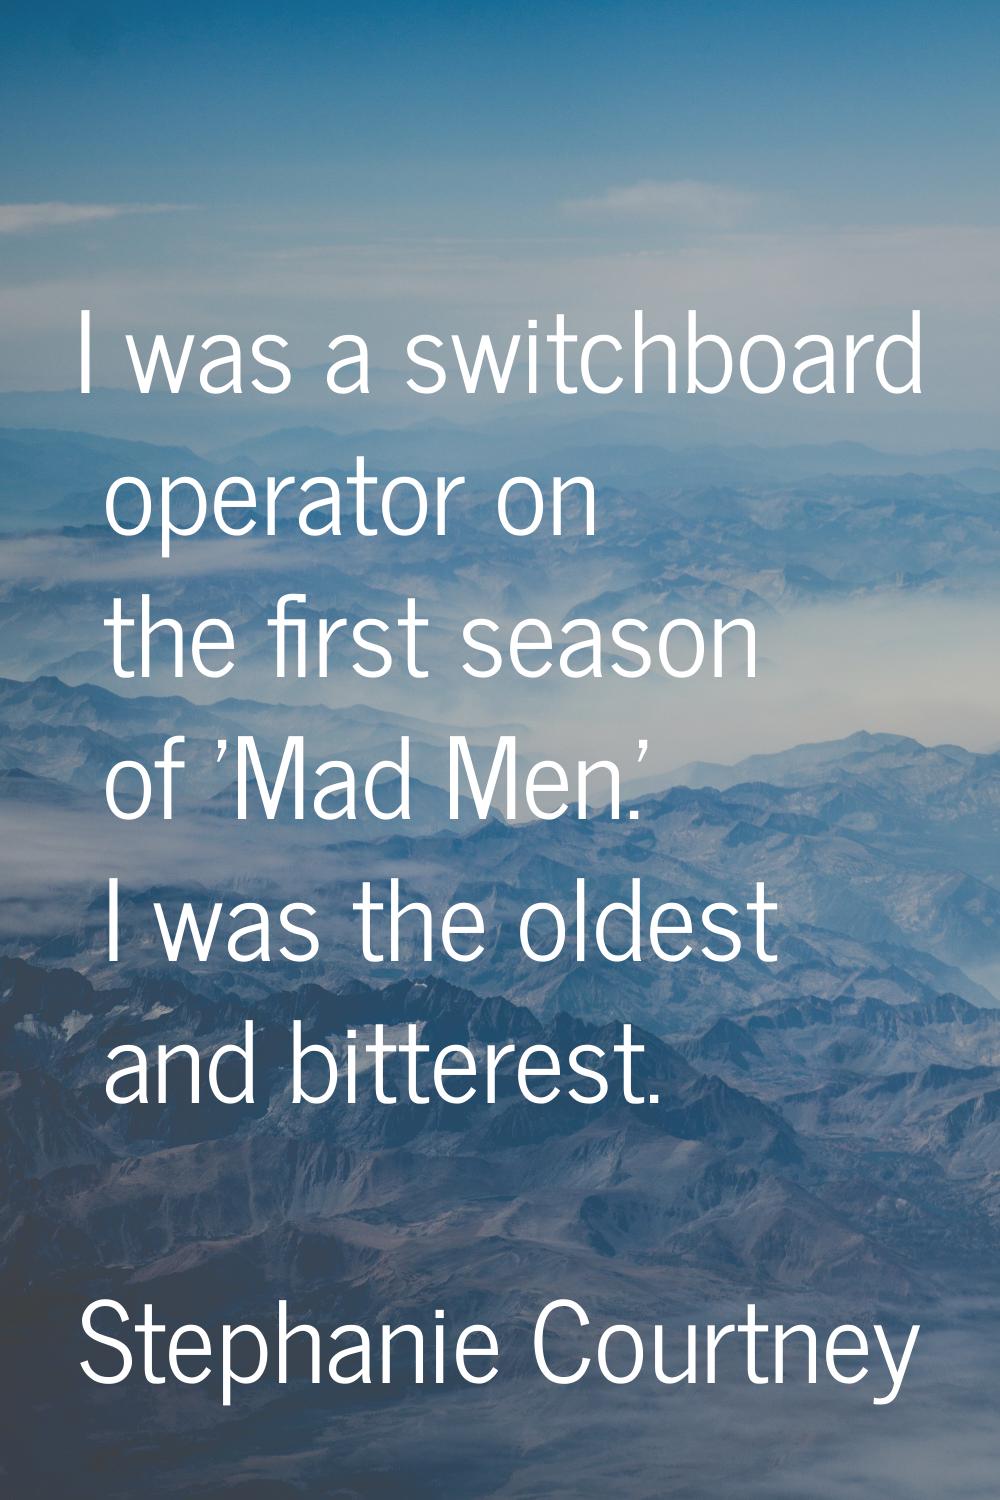 I was a switchboard operator on the first season of 'Mad Men.' I was the oldest and bitterest.